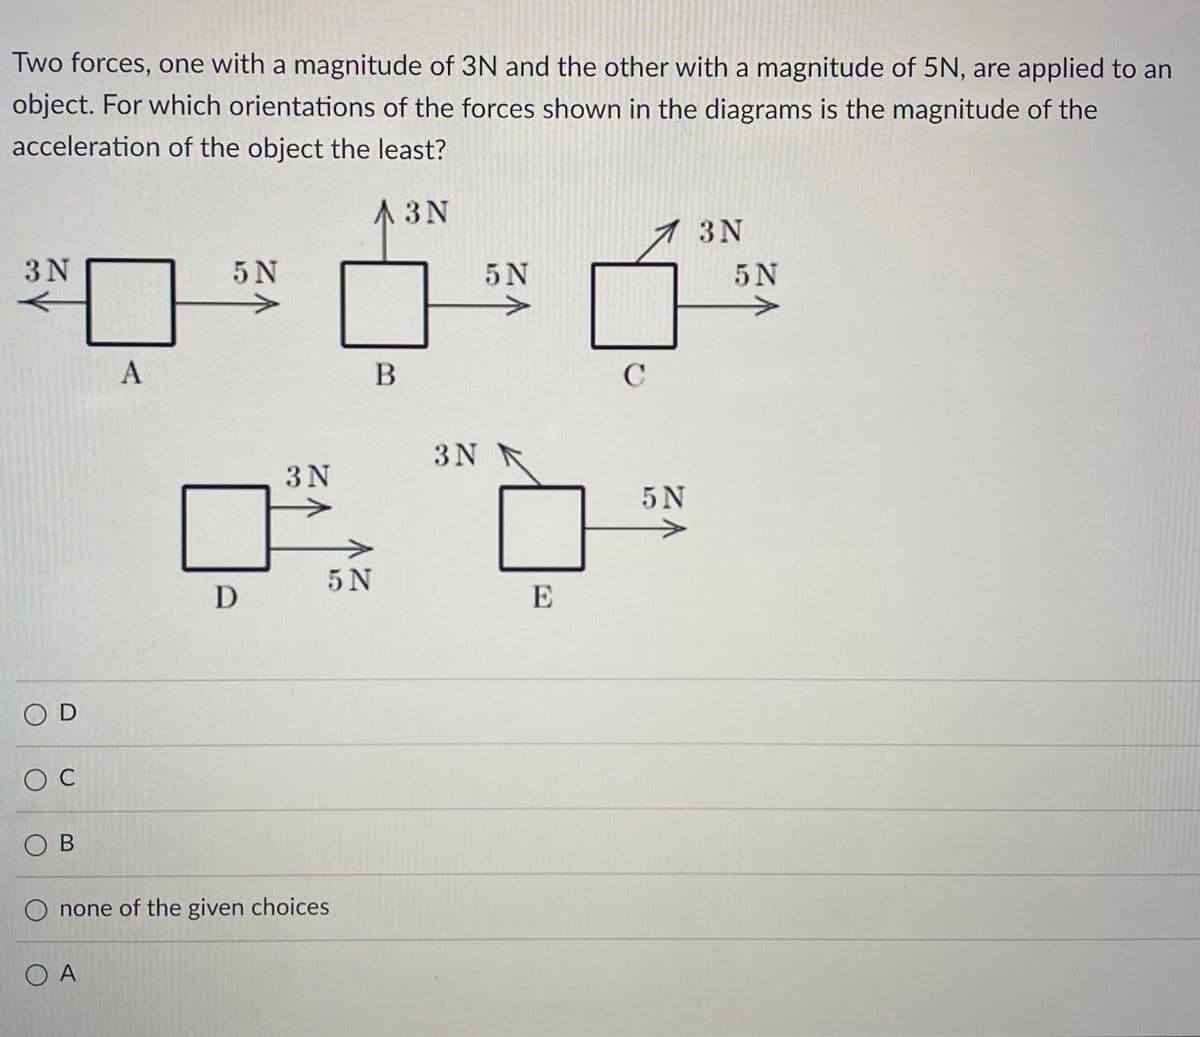 Two forces, one with a magnitude of 3N and the other with a magnitude of 5N, are applied to an
object. For which orientations of the forces shown in the diagrams is the magnitude of the
acceleration of the object the least?
A3N
3N
OD
O C
OB
A
5 N
D
3N
5N
O none of the given choices
Ο Α
B
3N
5 N
E
C
5 N
3N
5 N